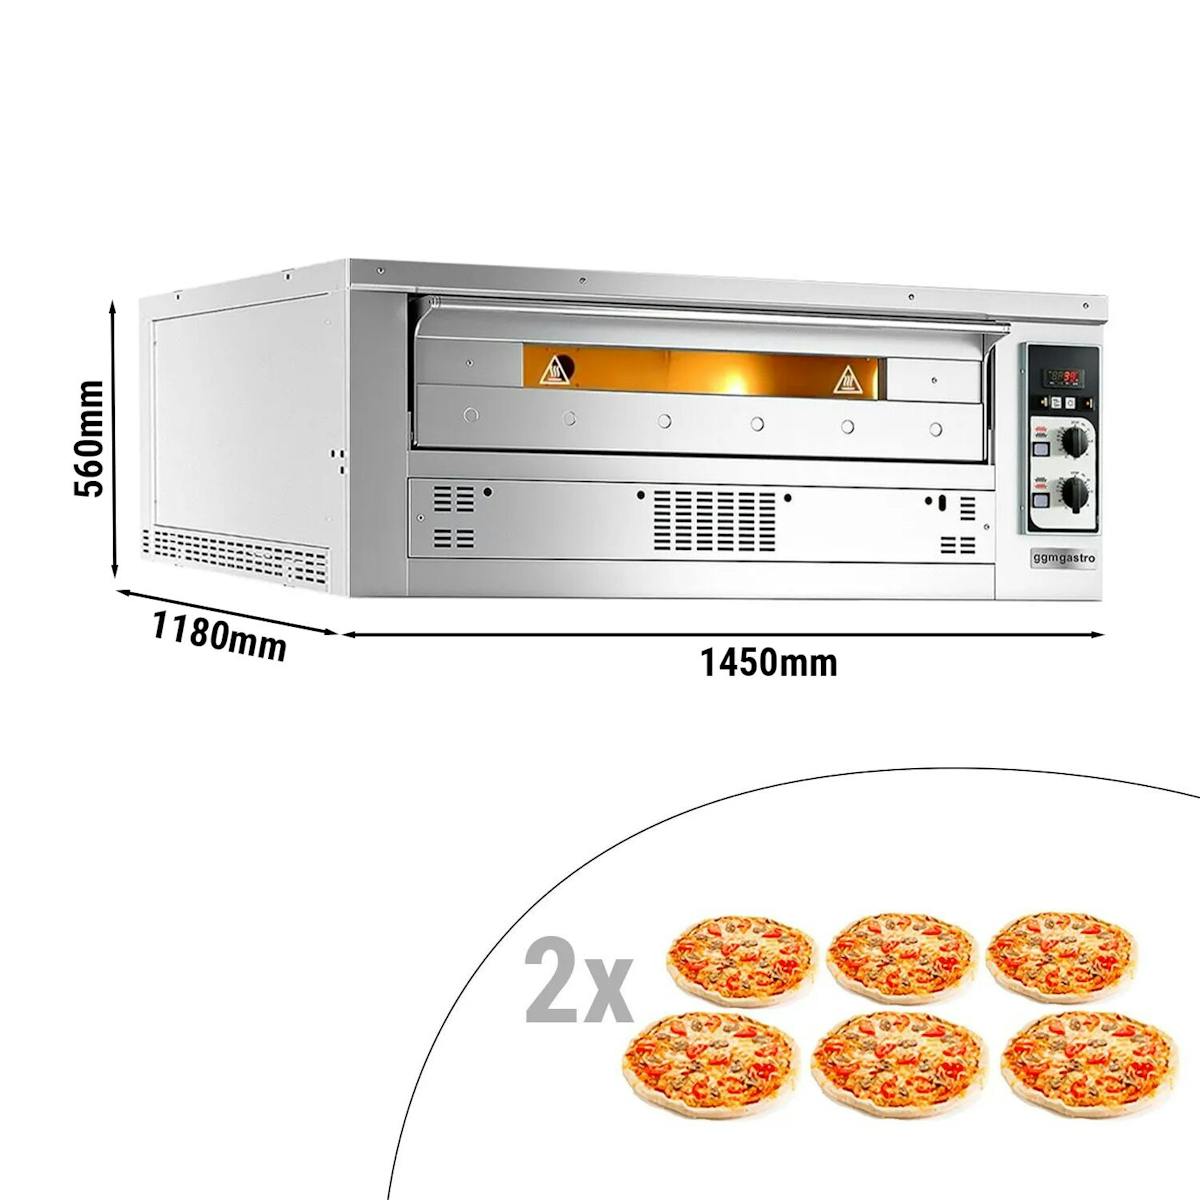 (2 pieces) Gas pizza oven - 6+6x 35cm - Manual